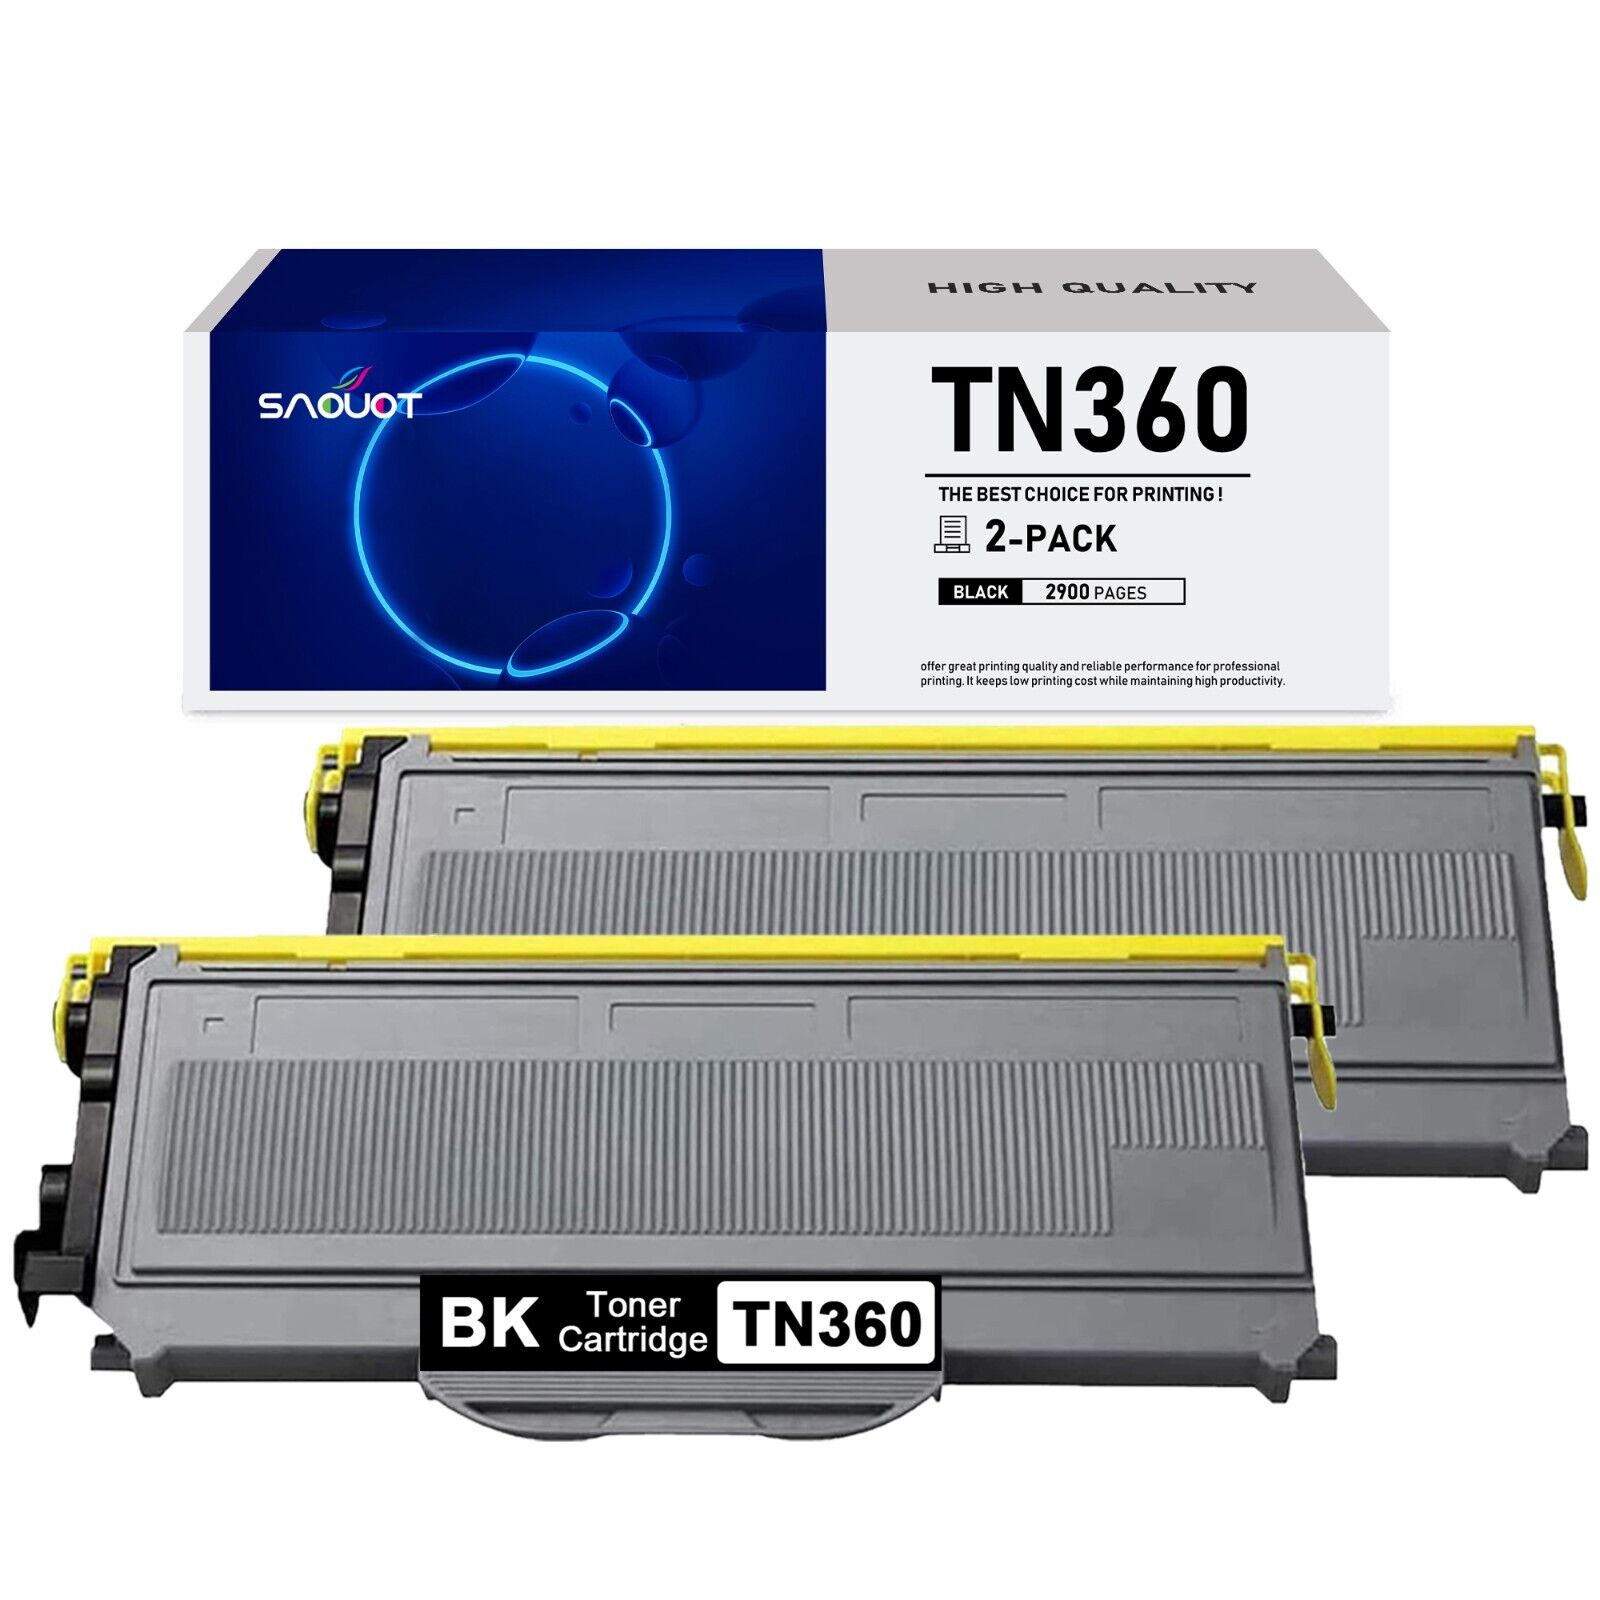 TN360 Toner Cartridge Black Replacement for Brother DCP-7030 MFC-7340 HL-2140